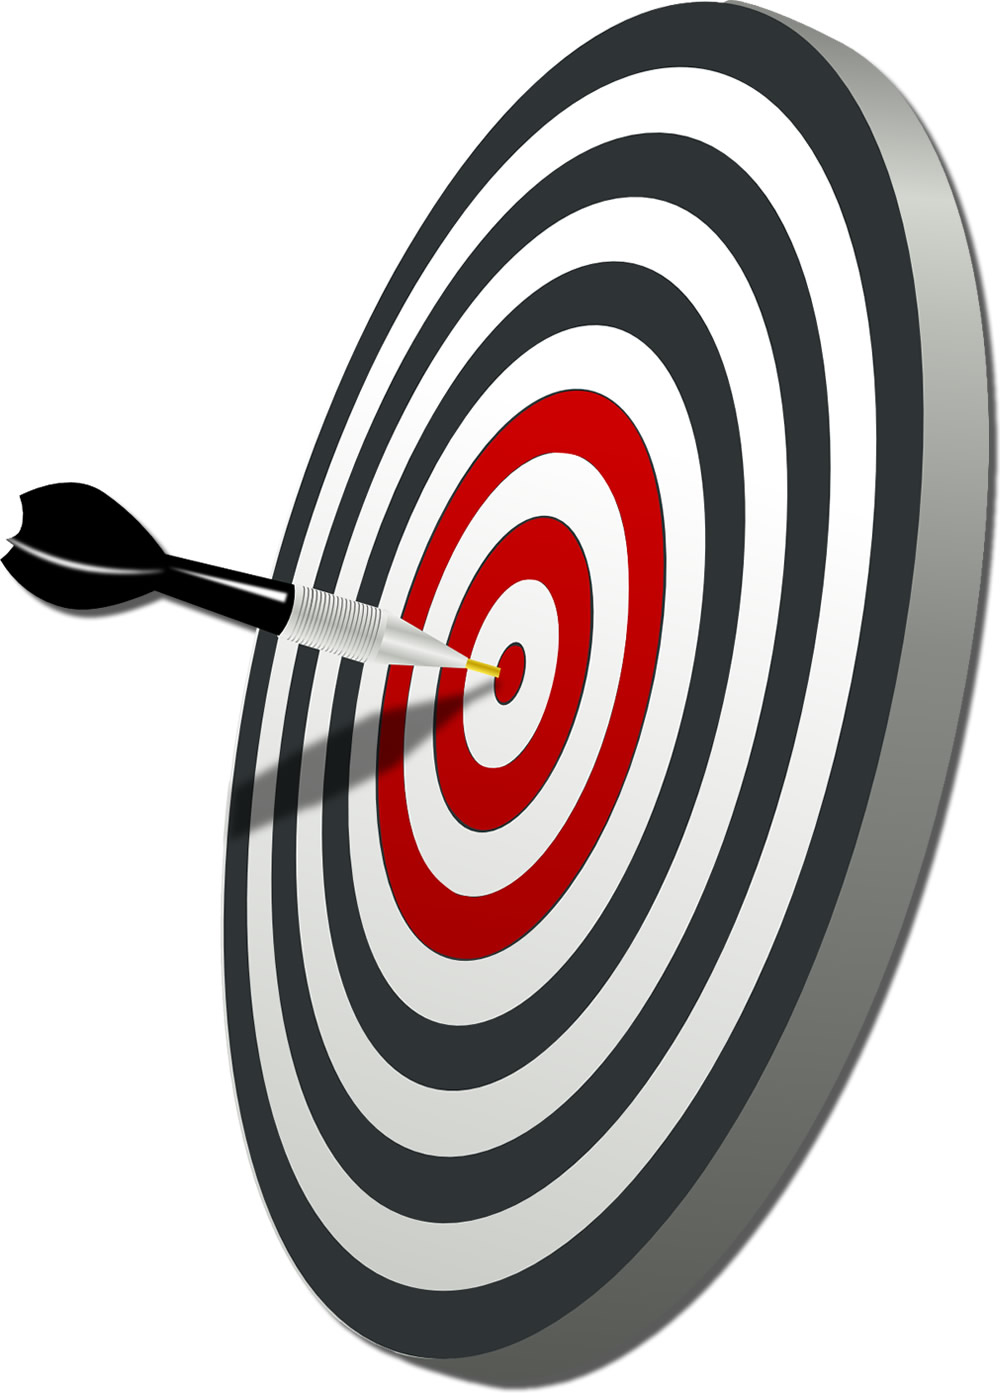 Deliver an on-target product and maximum numbers will buy what you sell